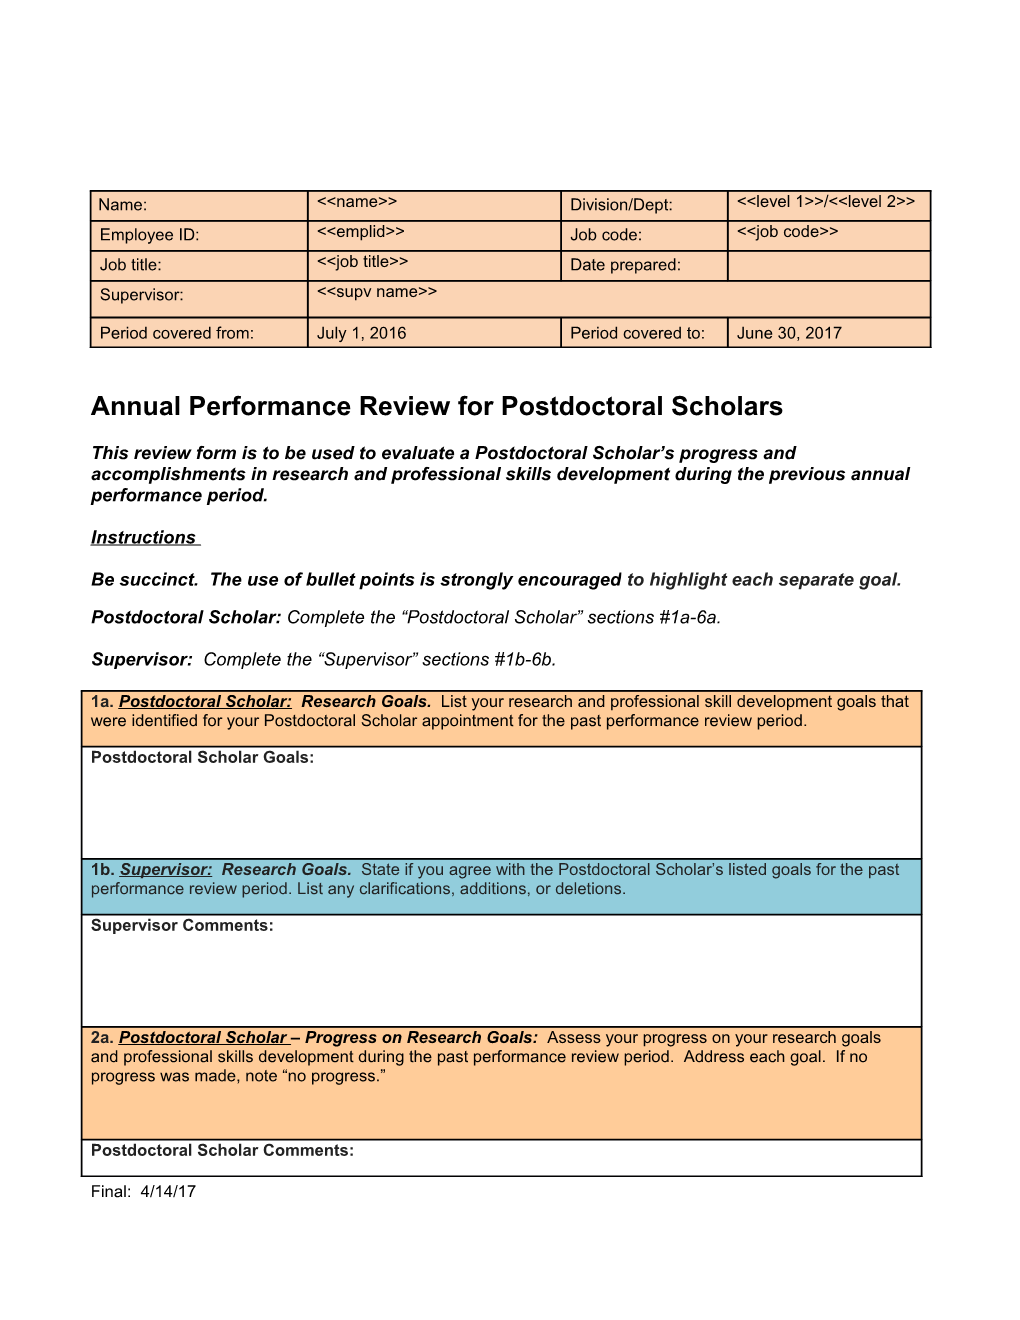 Annual Performance Review for Postdoctoral Scholars